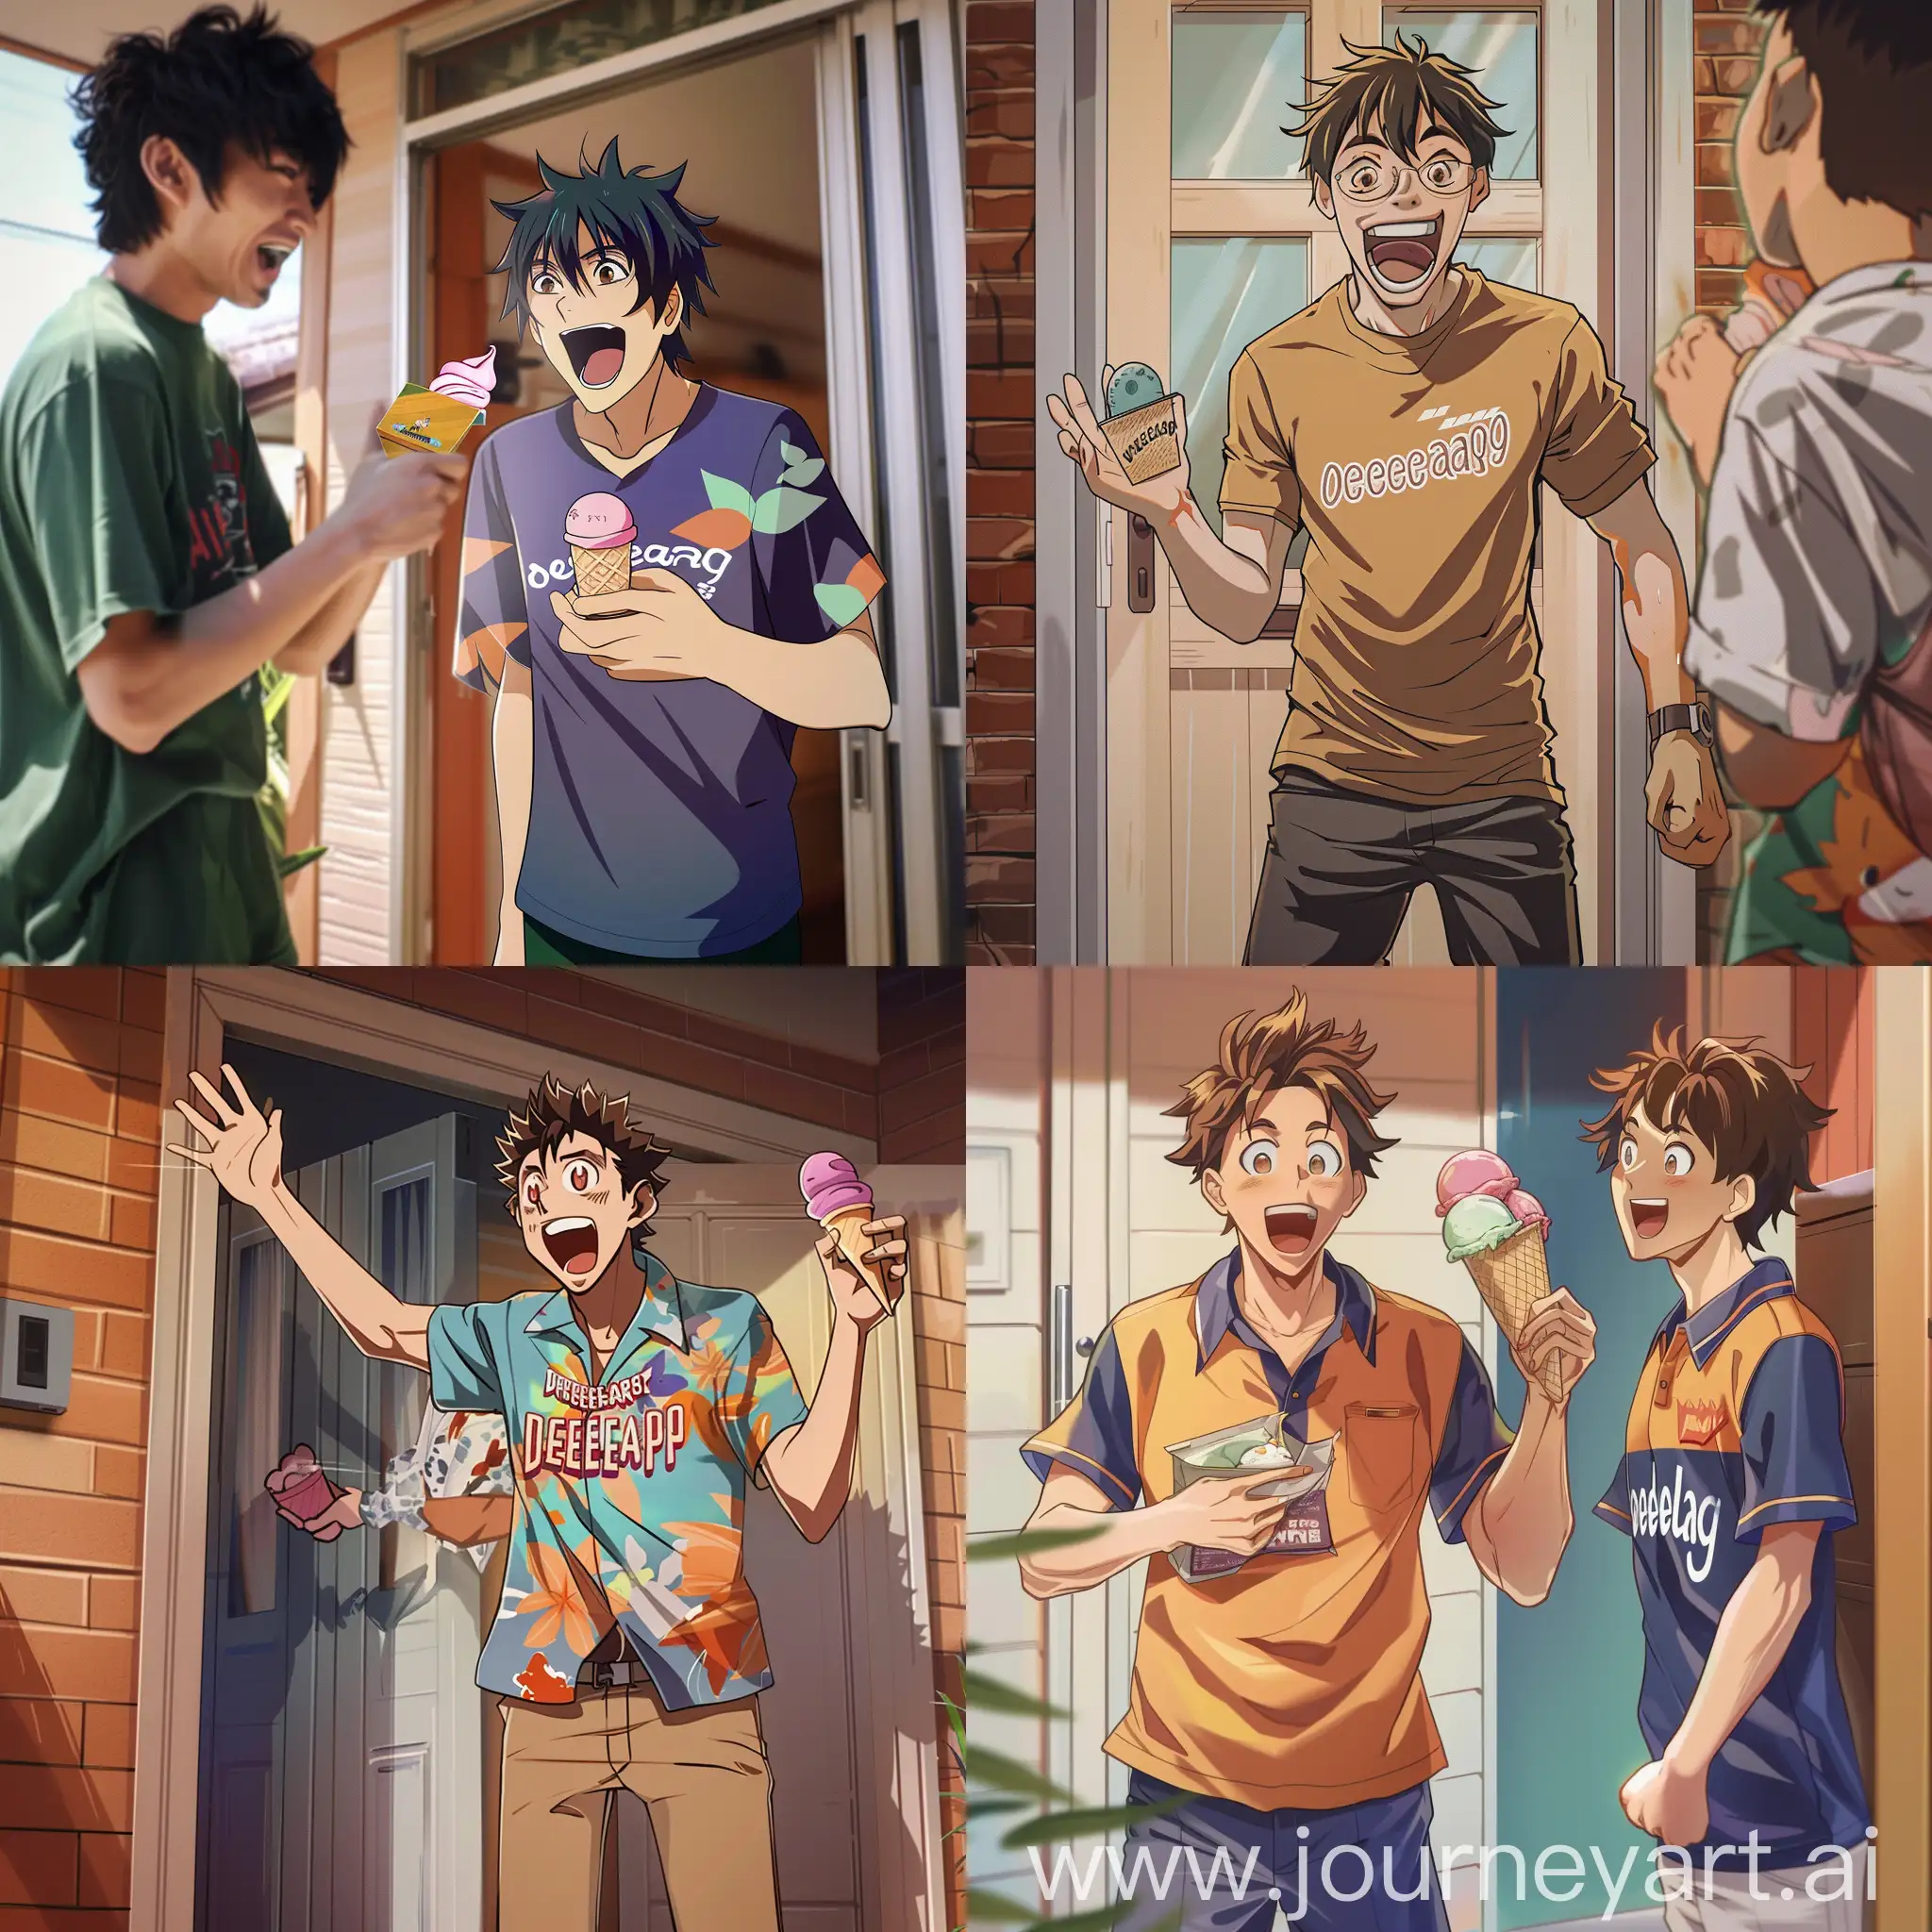 a photo anime style of an excited mangetting an ice cream from a delivery person at the doorstep with a shirt with the text "develeap" on it
